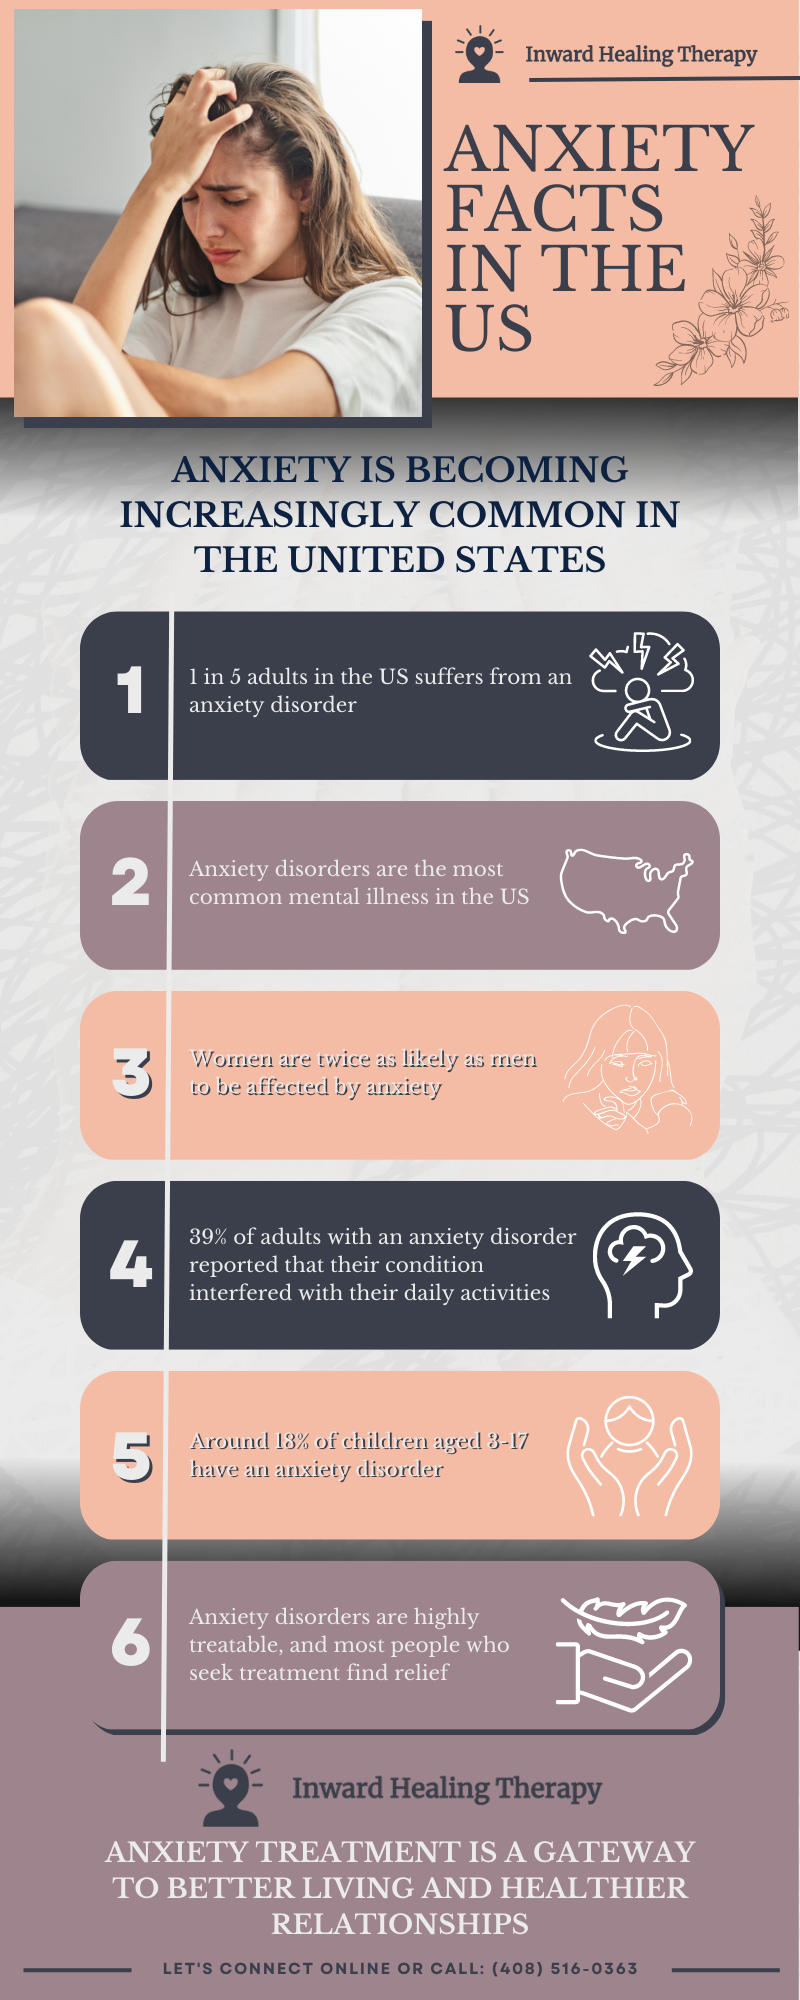 M38028 - Inward Healing Therapy - Infographic - Anxiety Facts in the US.png